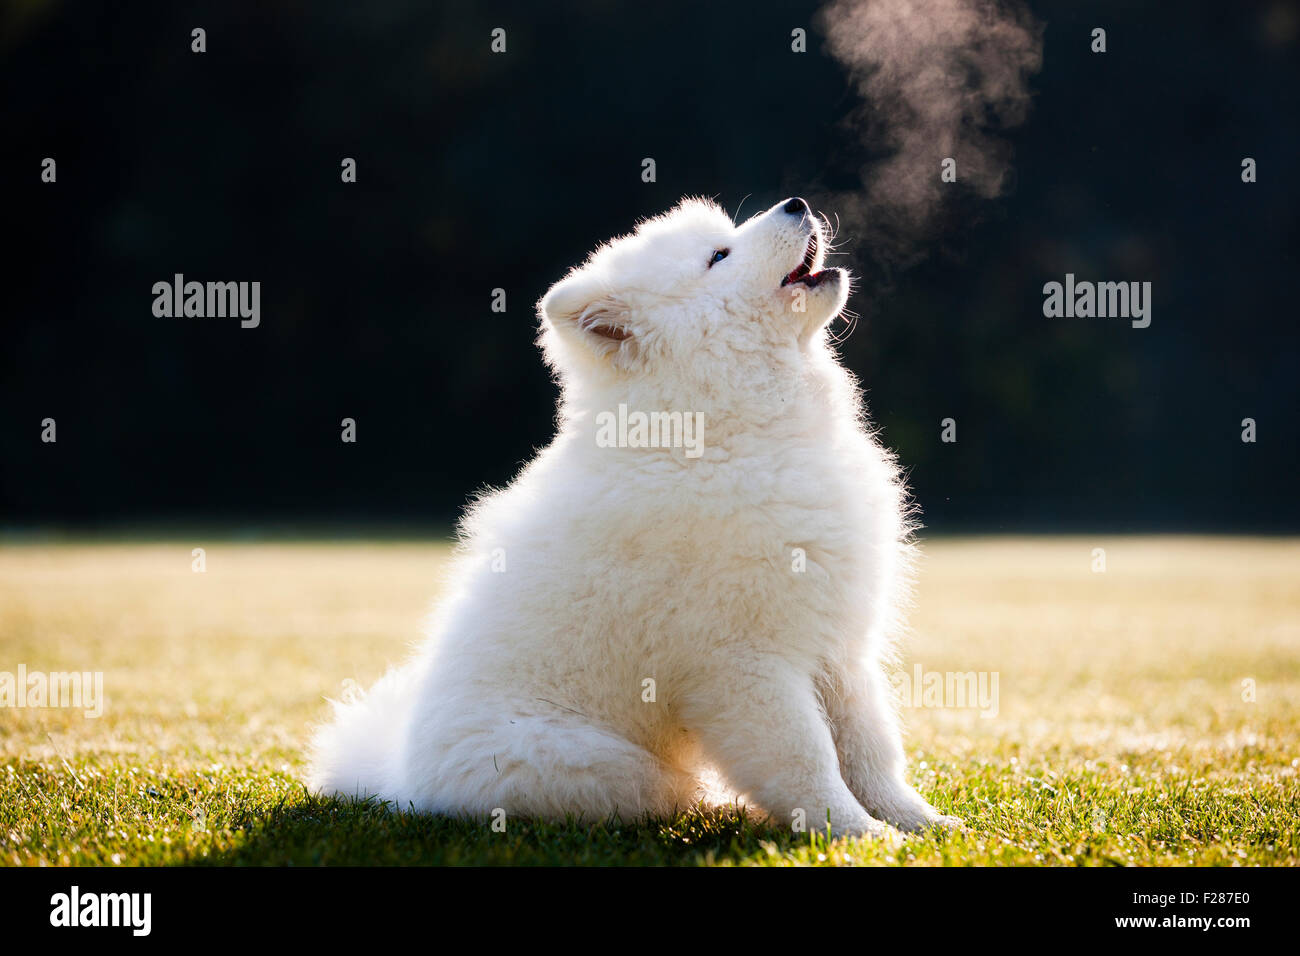 Samoyed dog, puppy, sitting in the grass, howling Stock Photo